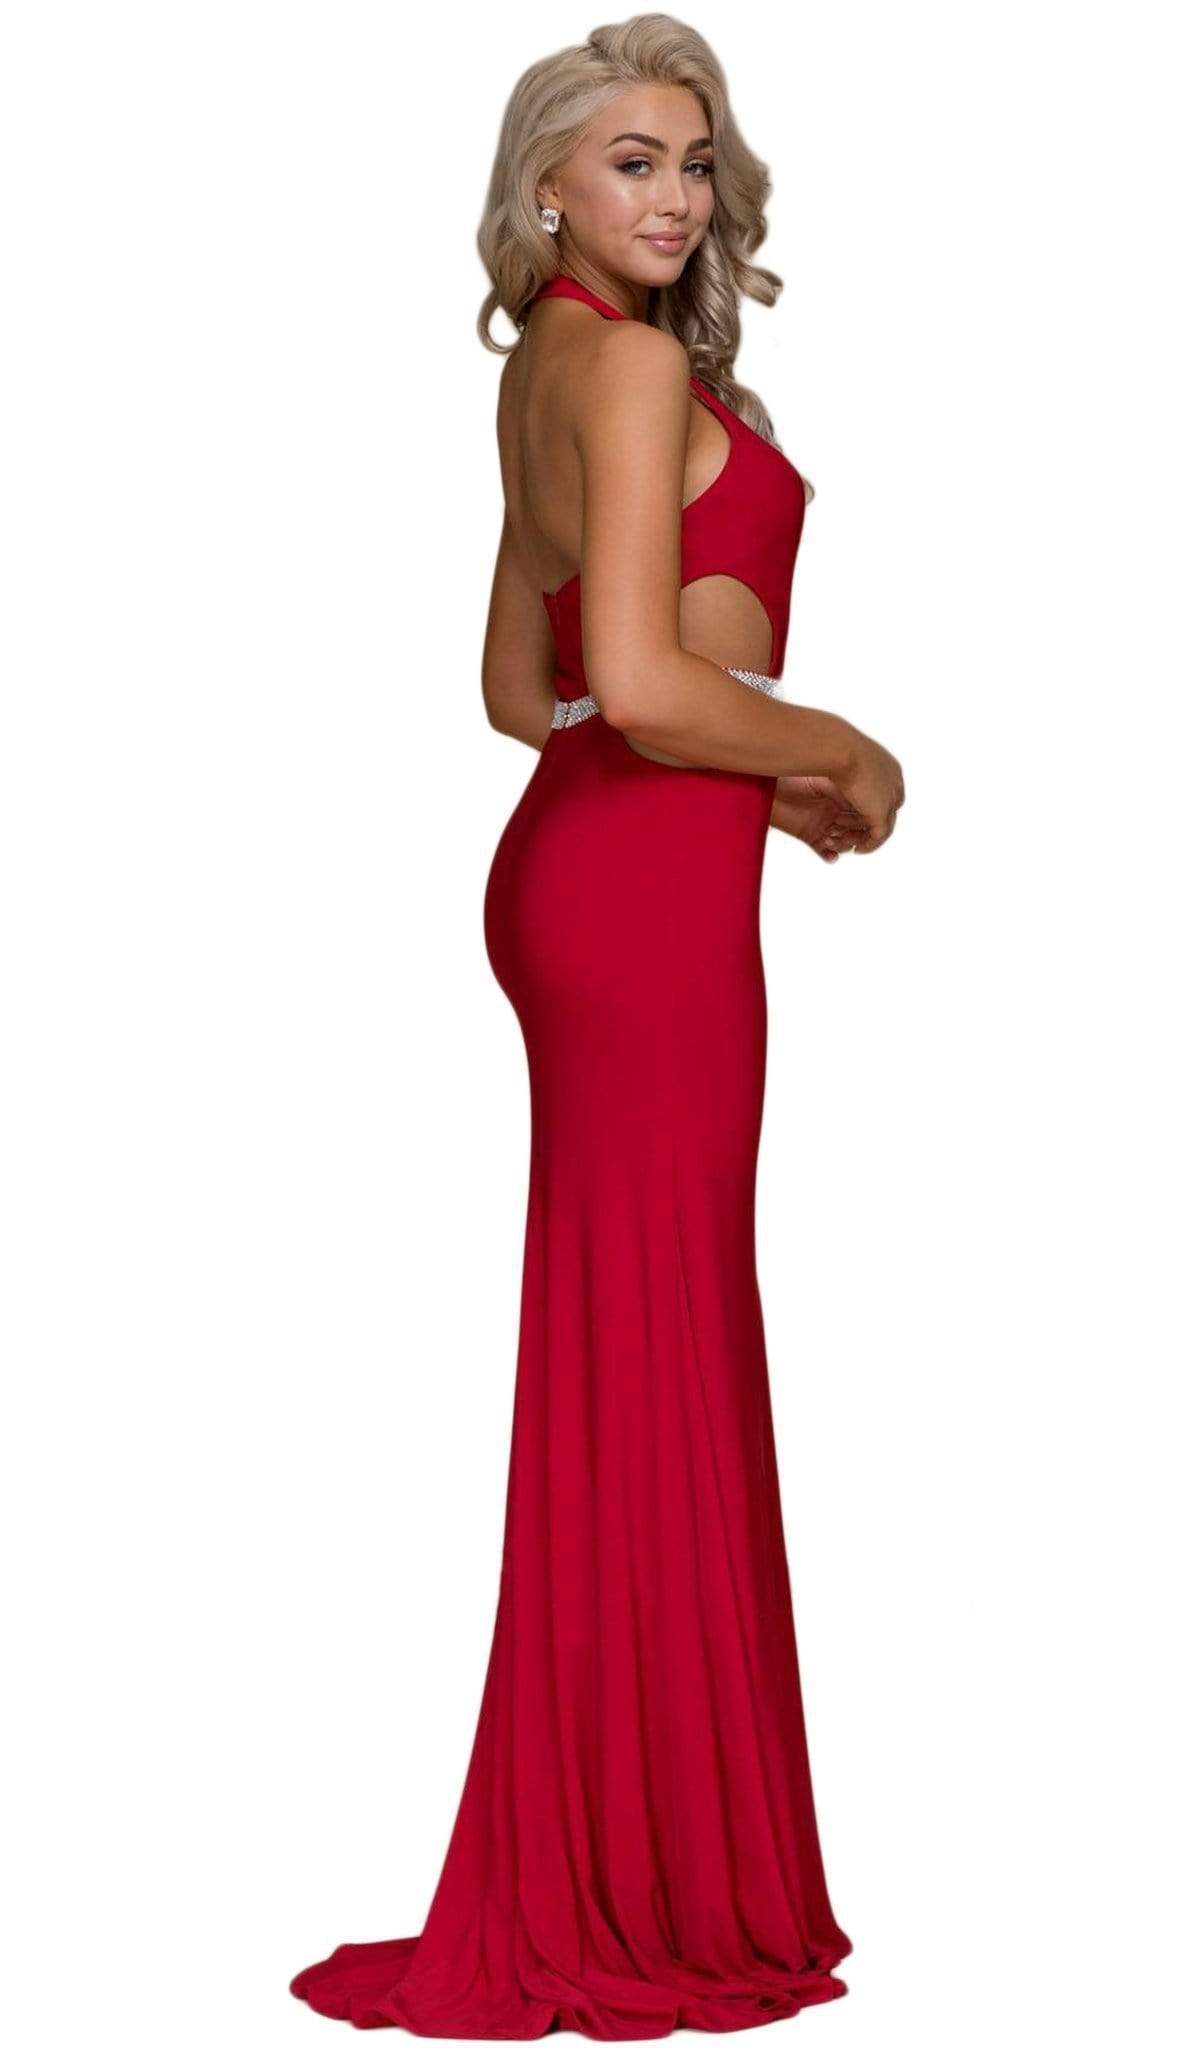 Nox Anabel - A046 Plunging Halter Embellished Sheath Dress Special Occasion Dress